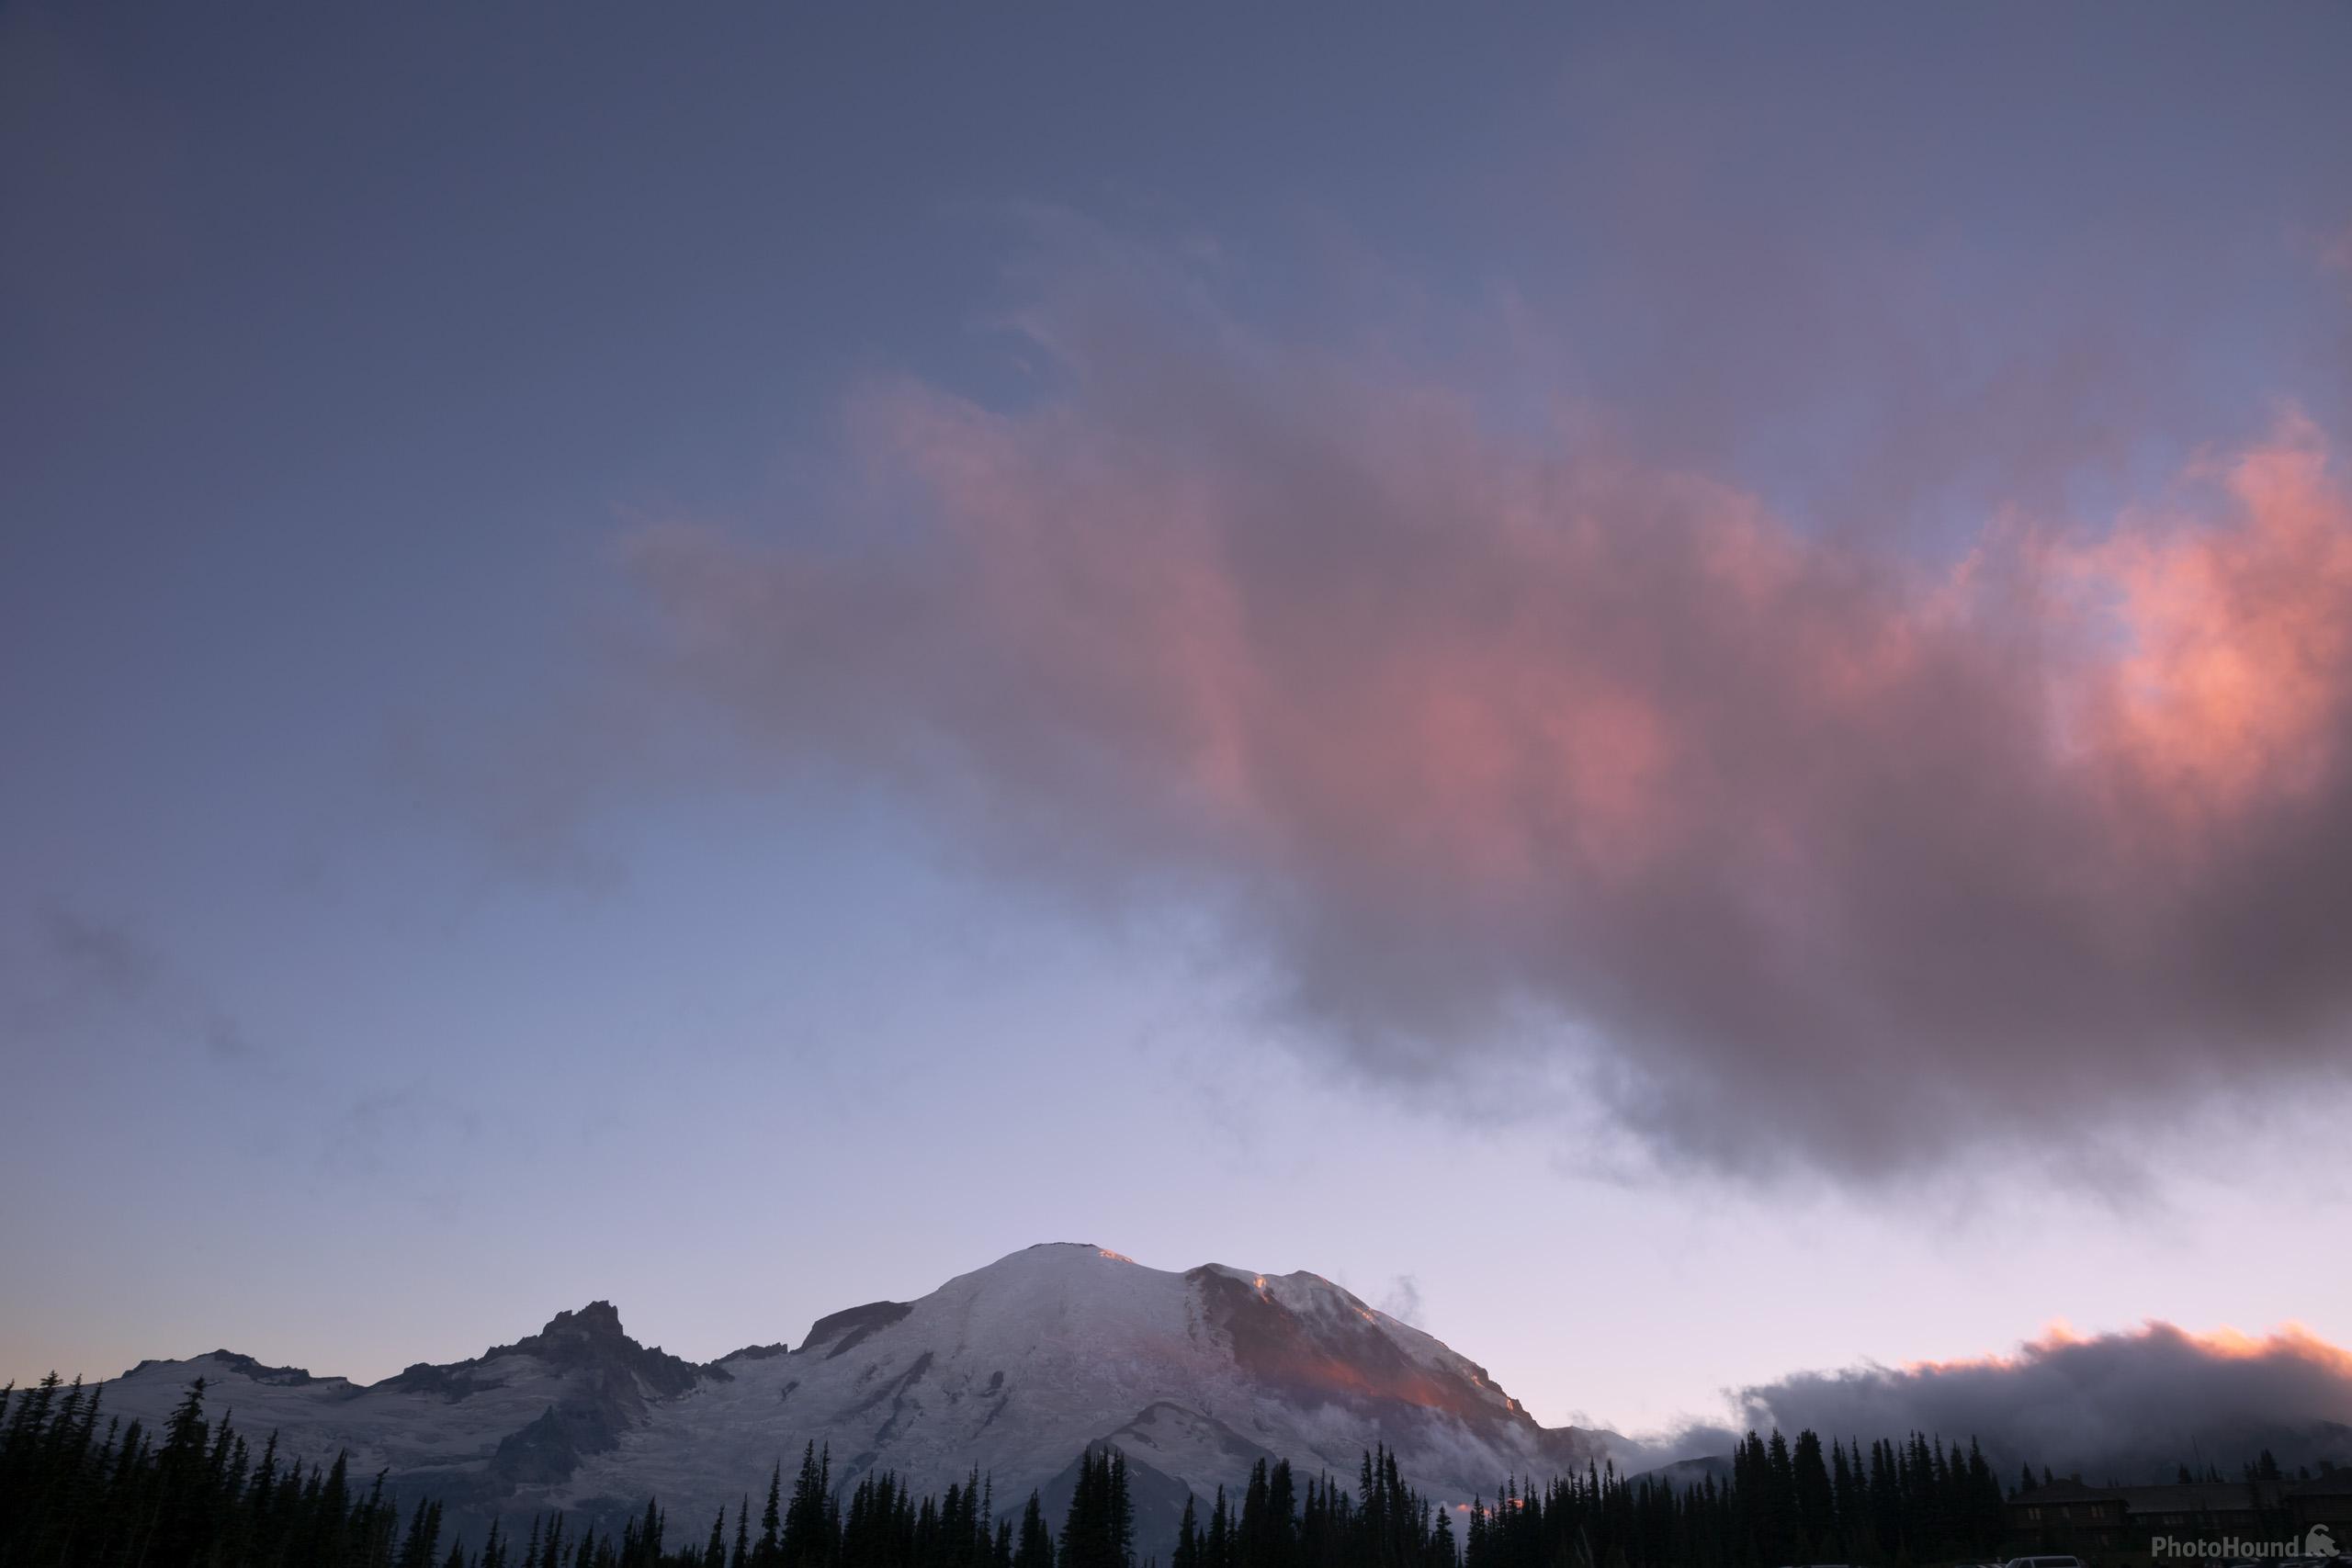 Image of Sunrise and Sourdough Ridge, Mount Rainier National Park by T. Kirkendall and V. Spring